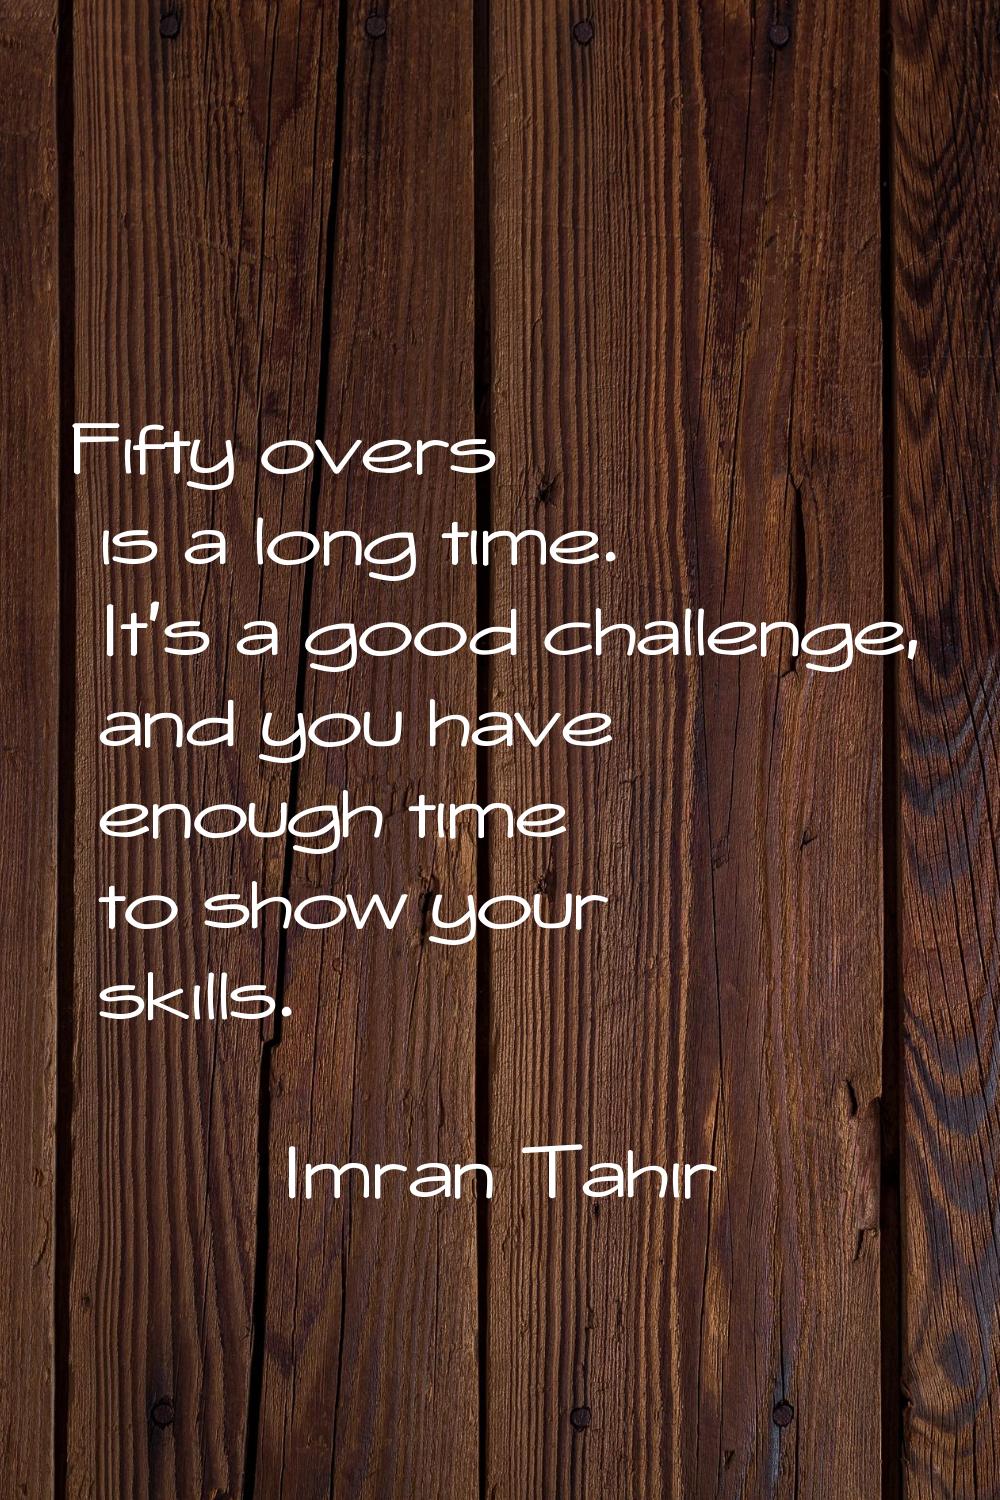 Fifty overs is a long time. It's a good challenge, and you have enough time to show your skills.